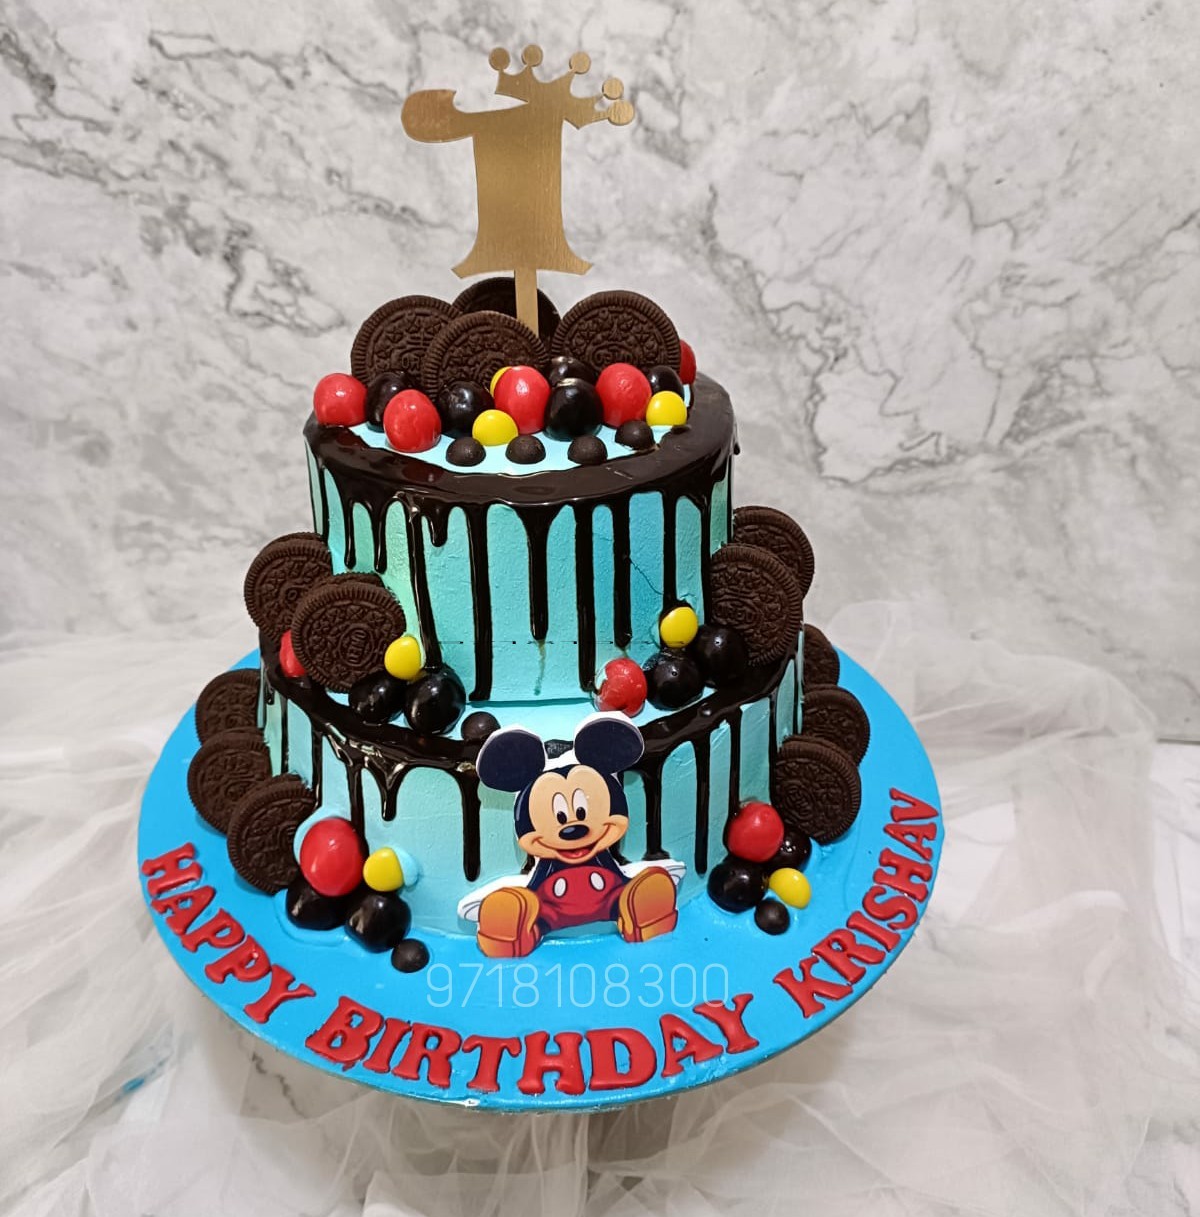 large-collection-of-999-stunning-4k-images-of-mickey-mouse-cakes